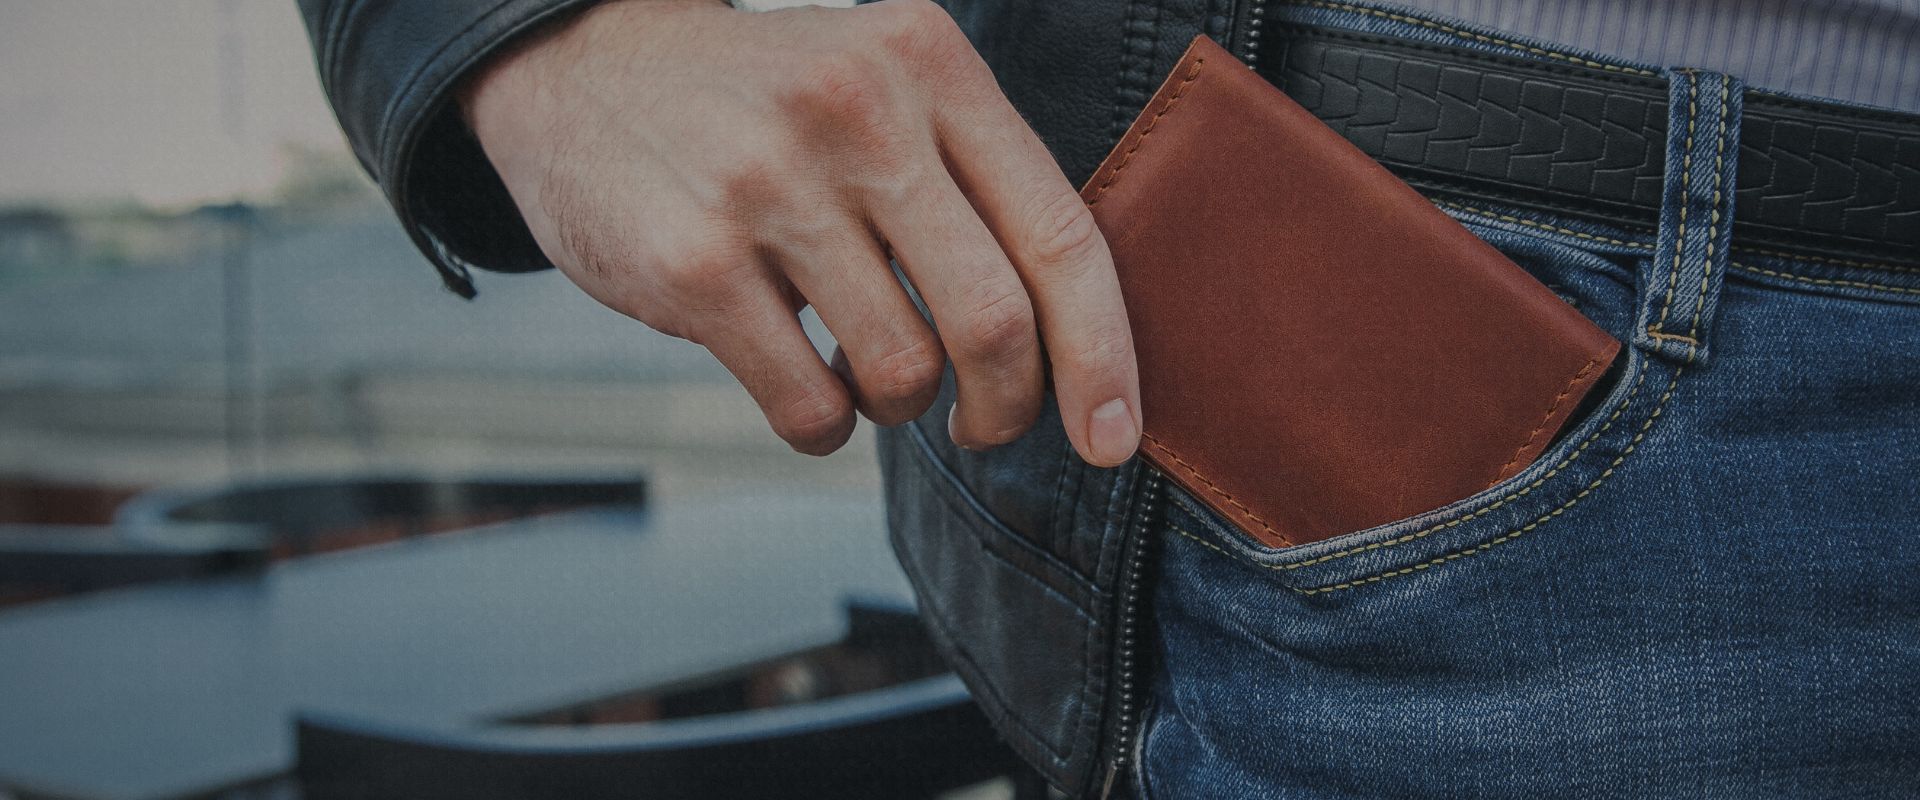 Men’s Wallet Guide: Choosing the Perfect Slim, Hard Cover, Front-Pocket RFID-Blocking Wallet